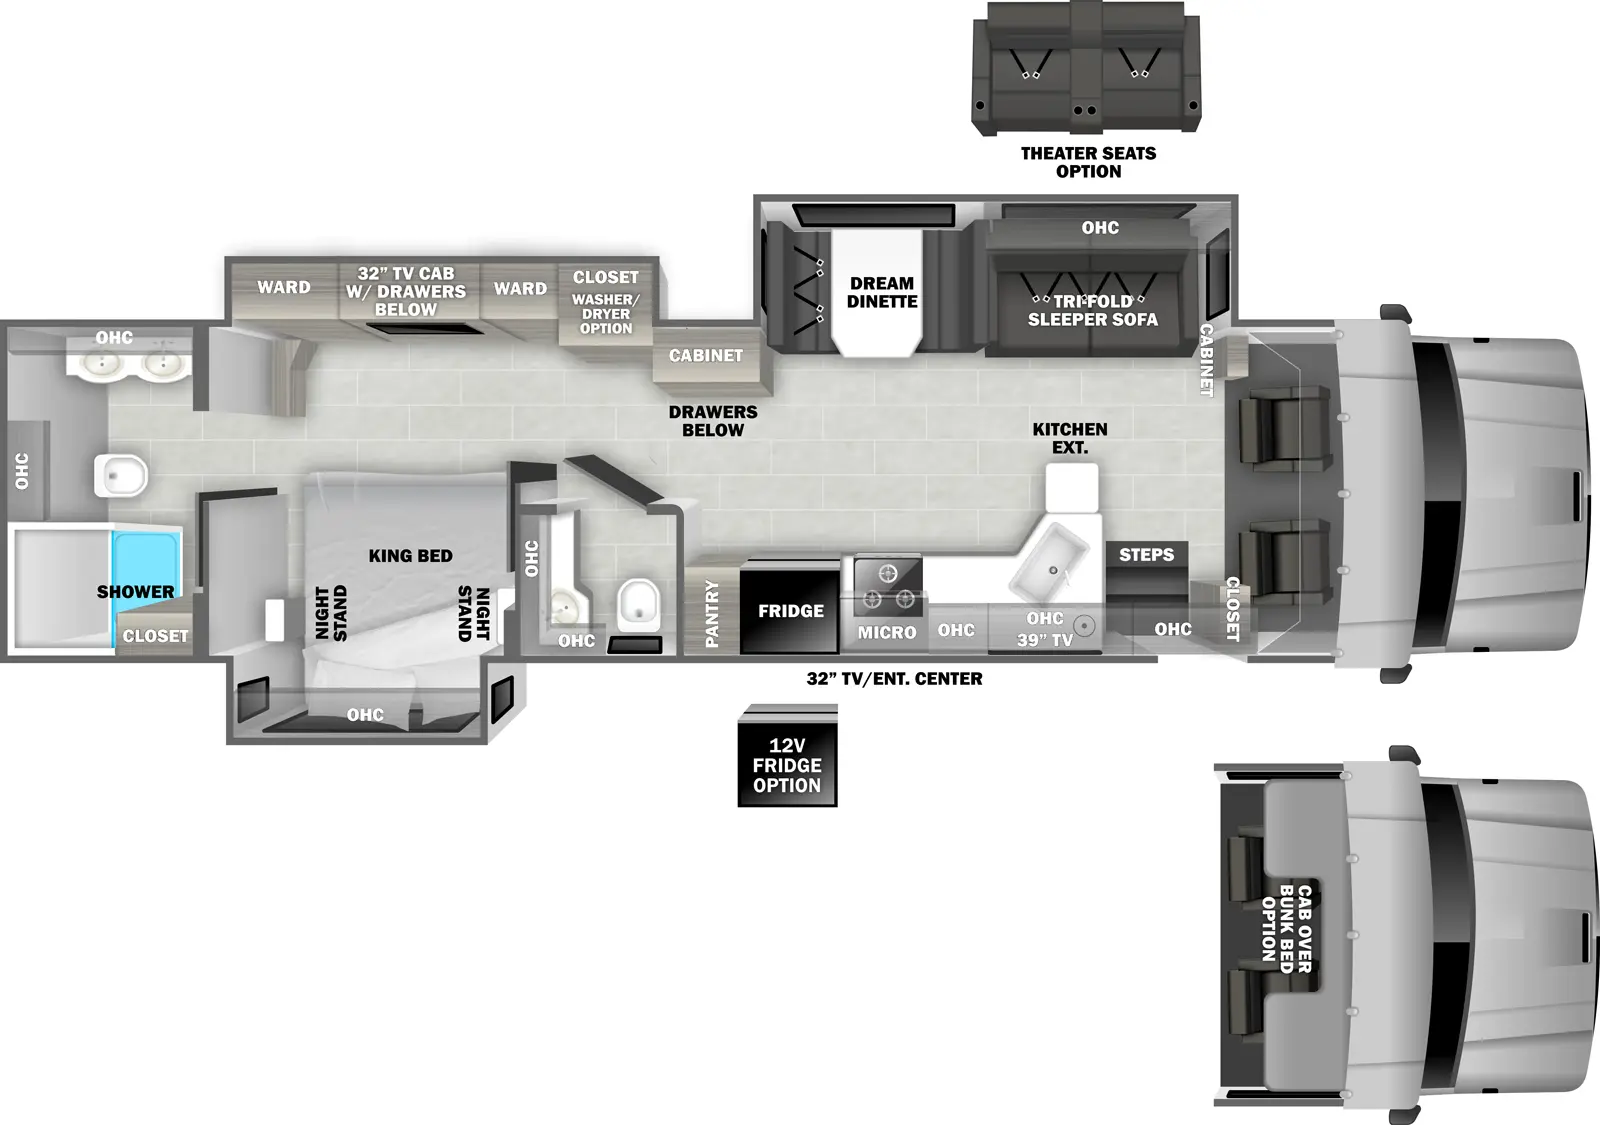 The 37RB has three slideouts and one entry. Exterior features a TV/entertainment center. Interior layout front to back: cockpit (optional cab over bunk bed); off-door side cabinet, and slideout with tri-fold sleeper sofa (optional theater seating), overhead cabinet, and dream dinette; door side closet, entry, overhead cabinet, kitchen counter with extension, sink, TV, microwave, cooktop, refrigerator (optional 2-way refrigerator), and pantry; off-door side cabinet with drawers below, and slideout with closet with washer/dryer option, and wardrobes with TV and drawers below; door side full bathroom with overhead cabinet; door side king bed slideout with overhead cabinet and night stands on each side; rear full bathroom with dual sinks, closet, and overhead cabinets.